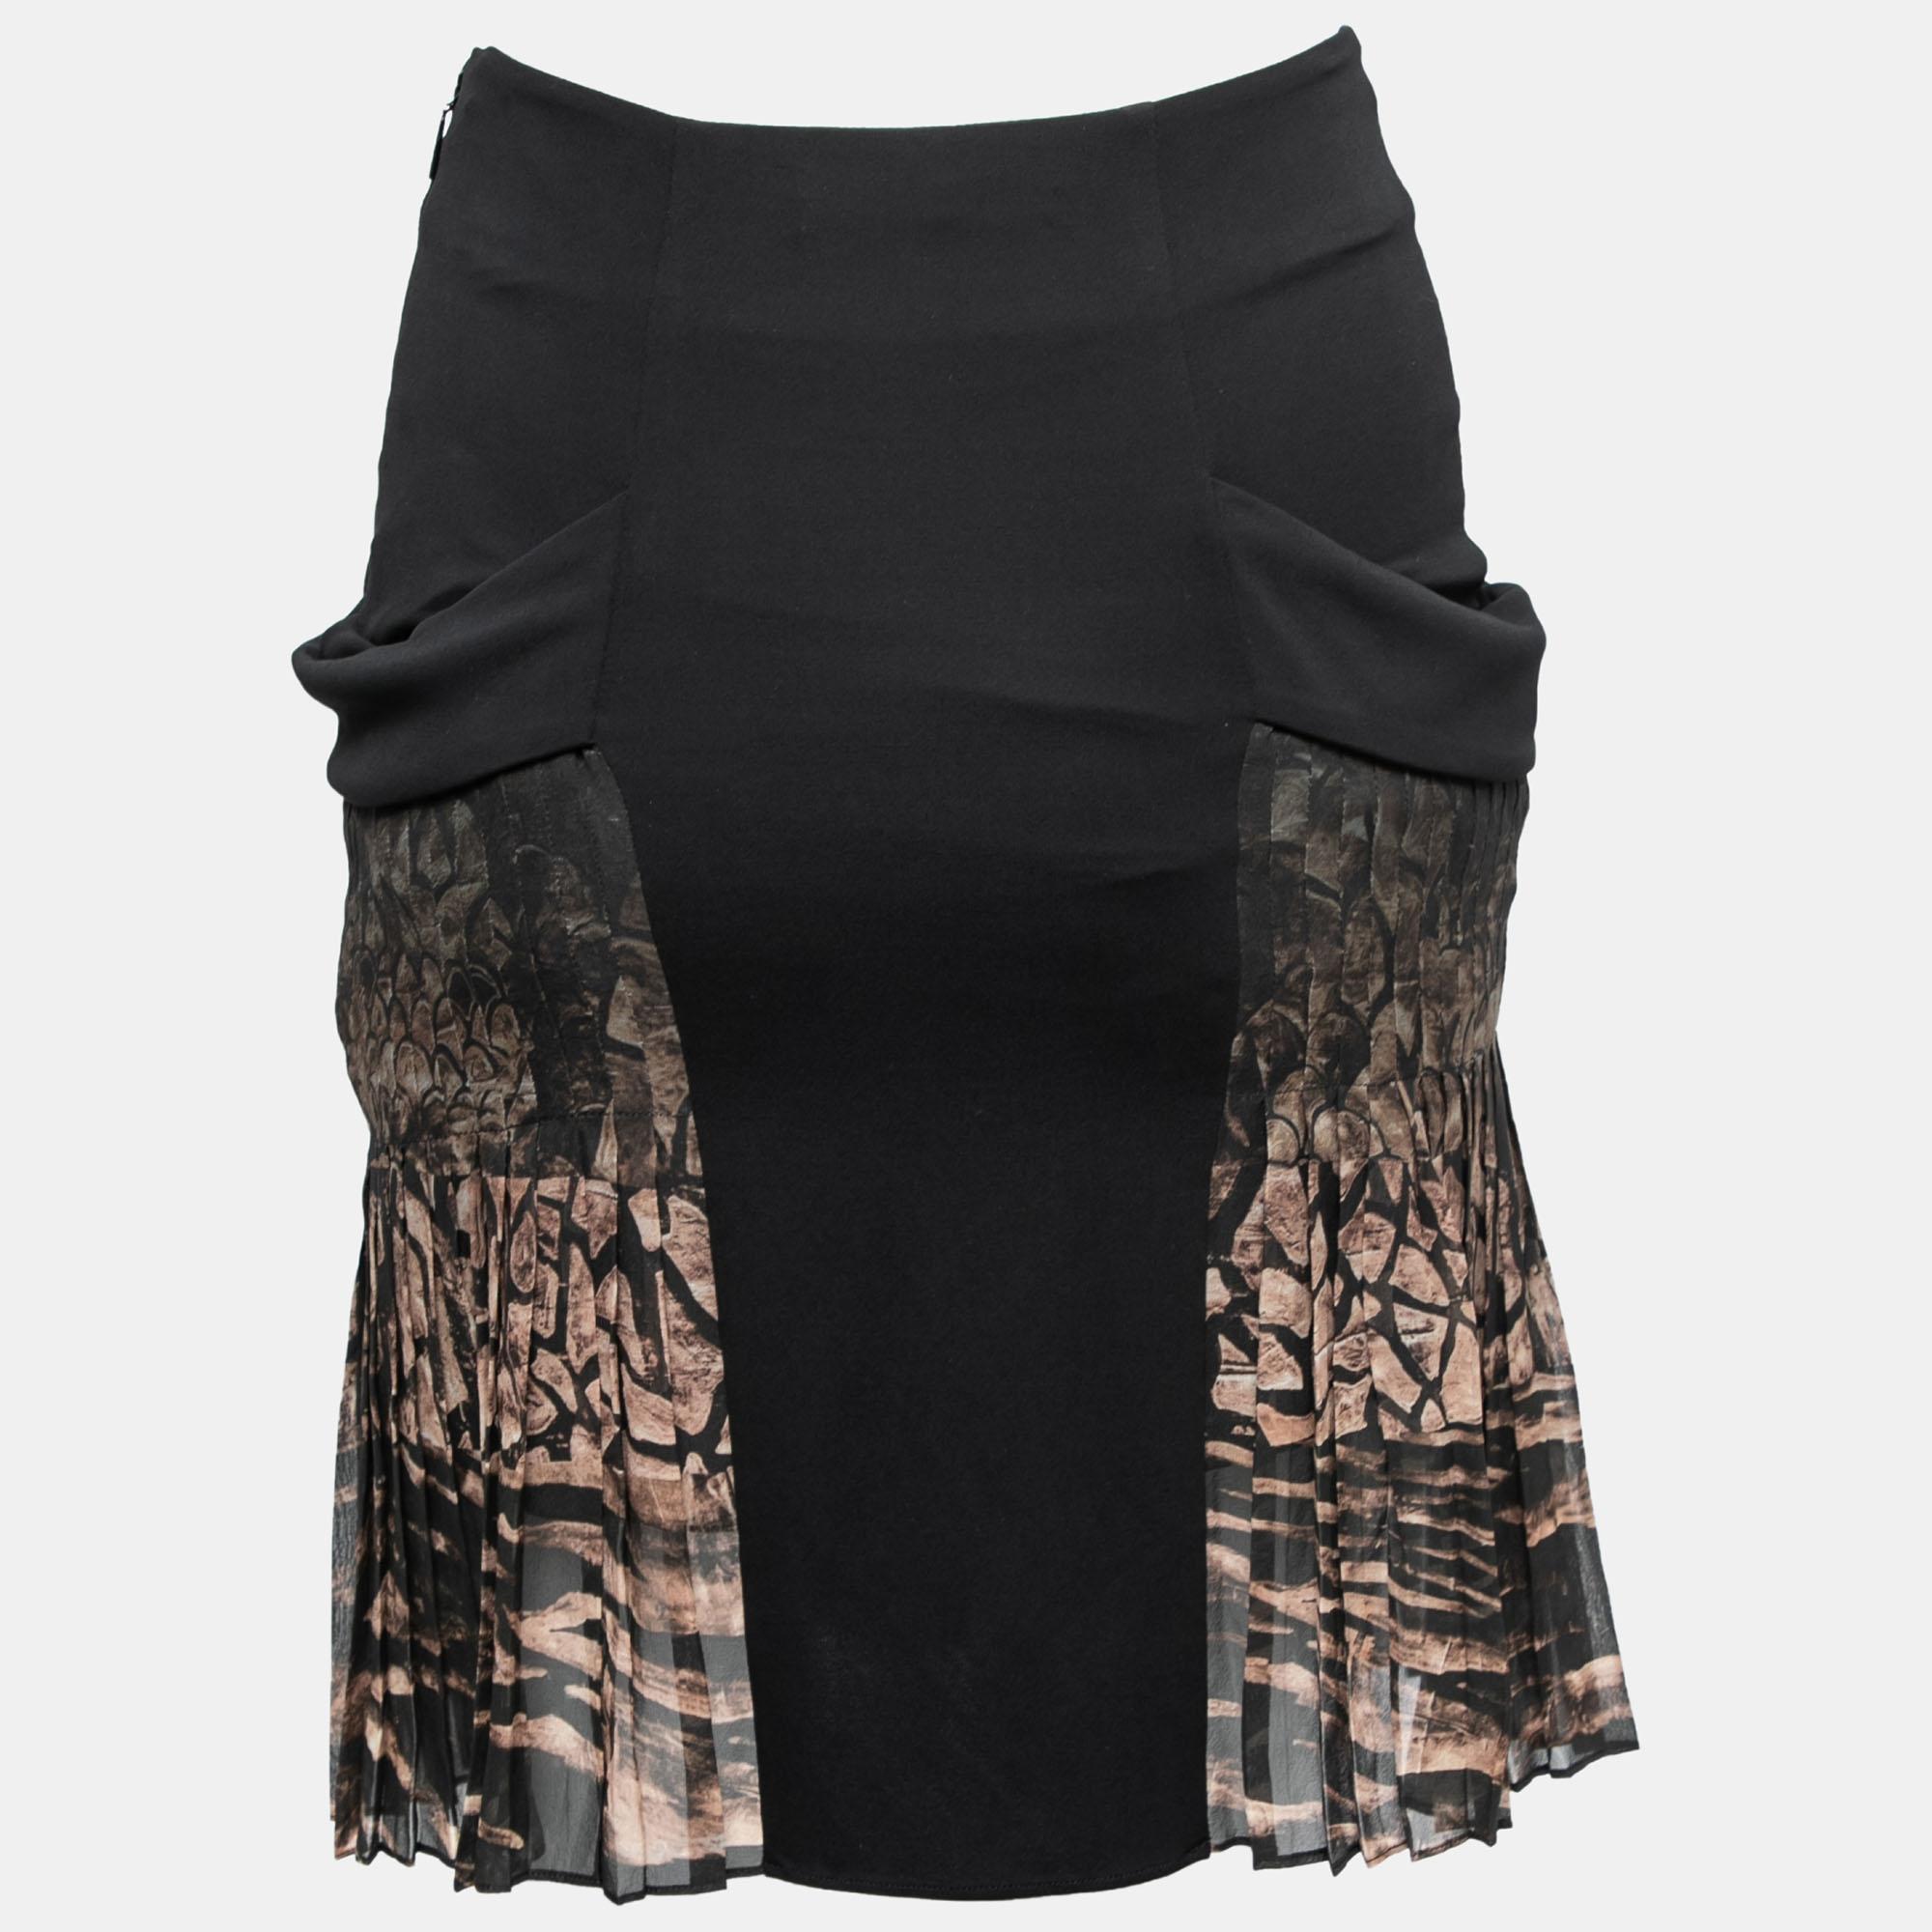 This gorgeous skirt from Roberto Cavalli is totally chic and a must-have for your closet. It is stitched from fine materials and has pleated, printed panels on the sides. Pair the black skirt with a matching top and accessories to elevate your